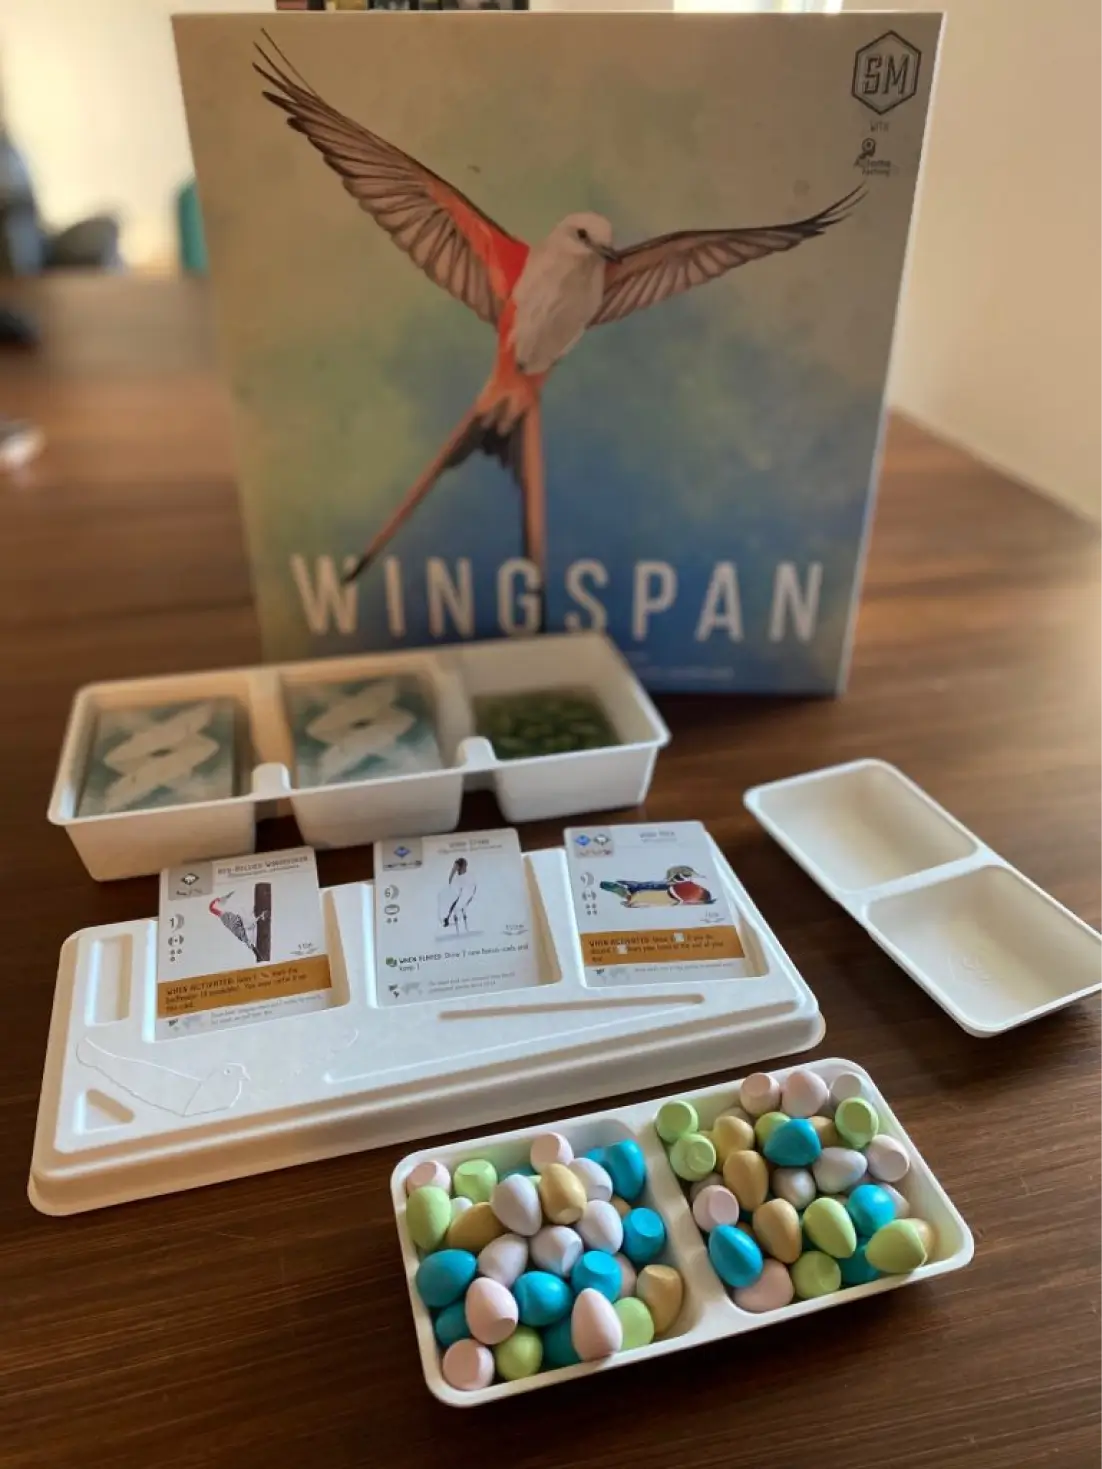 Bagasse trays are now standard in Wingspan (Credit: Stonemaier Games)